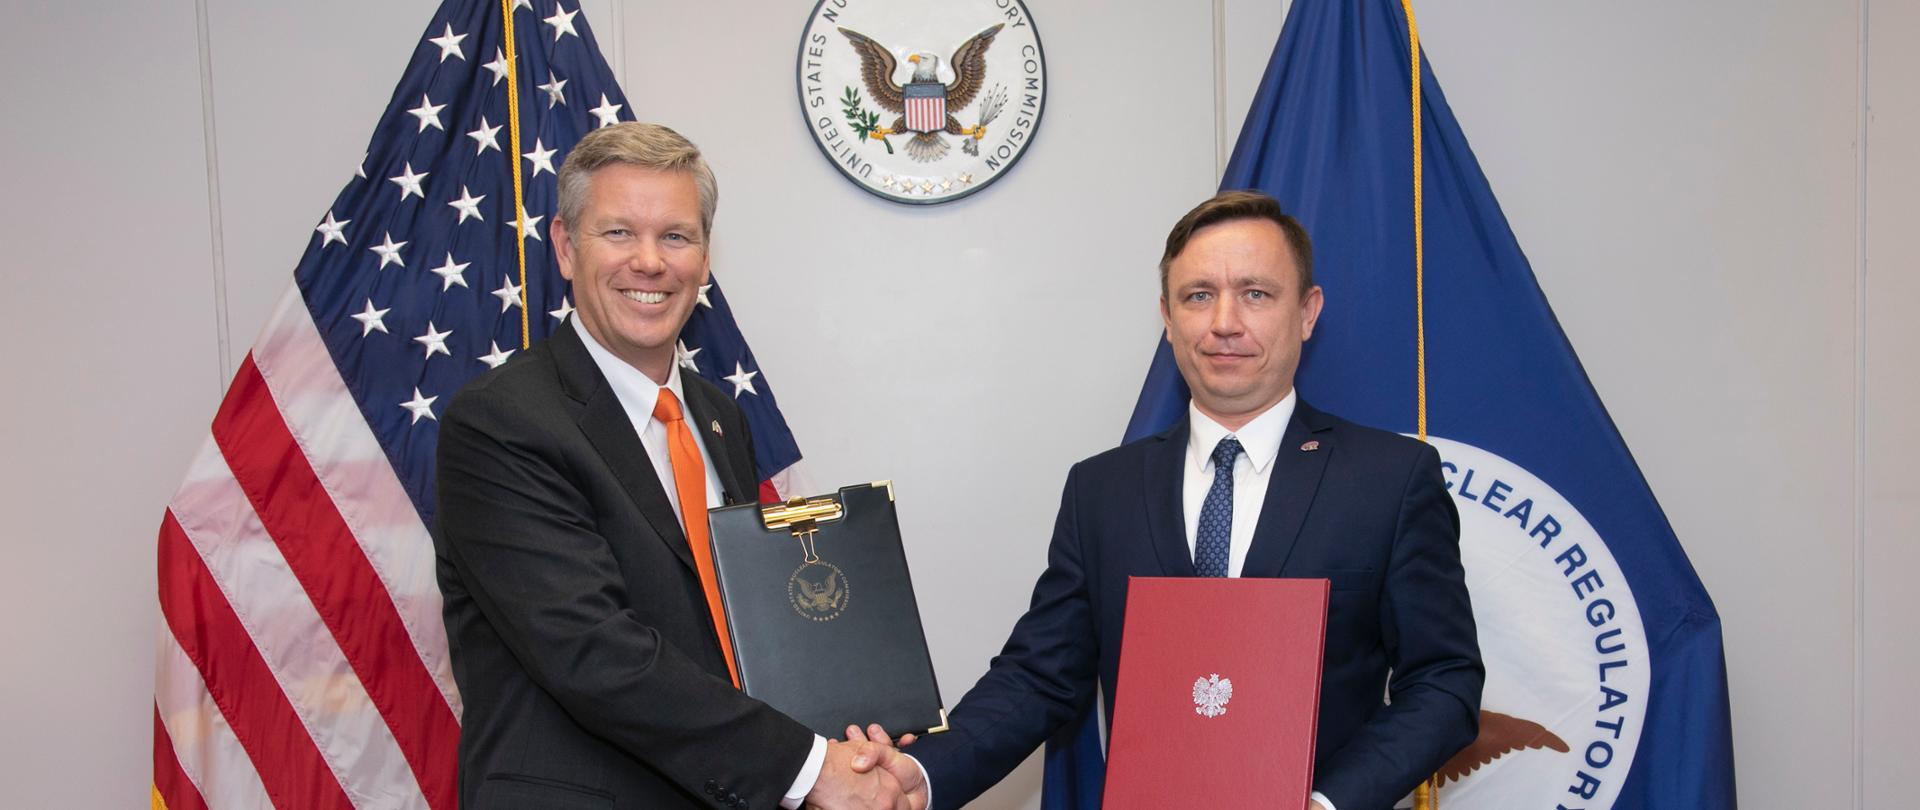 Chairman of the United States Nuclear Regulatory Commission (US NRC) Christopher Hanson and President of the National Atomic Energy Agency Andrzej Głowacki shake hands after signing a cooperation agreement